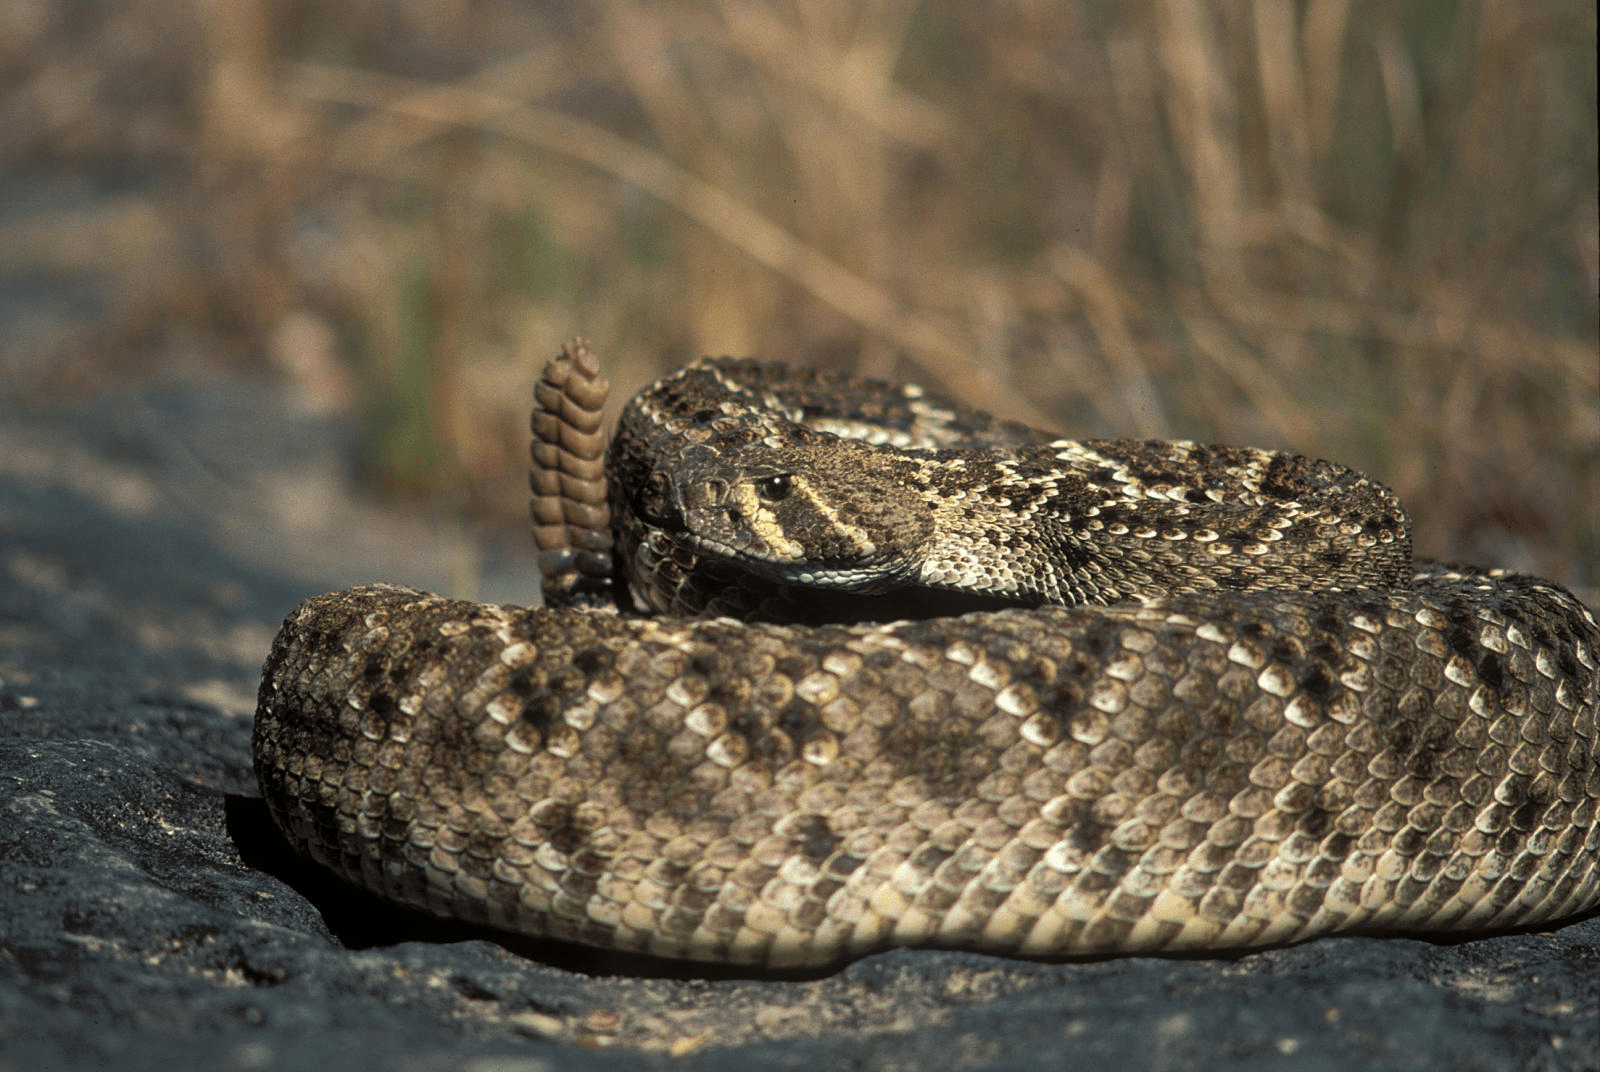 Western diamondbacks are known to have a nasty disposition.